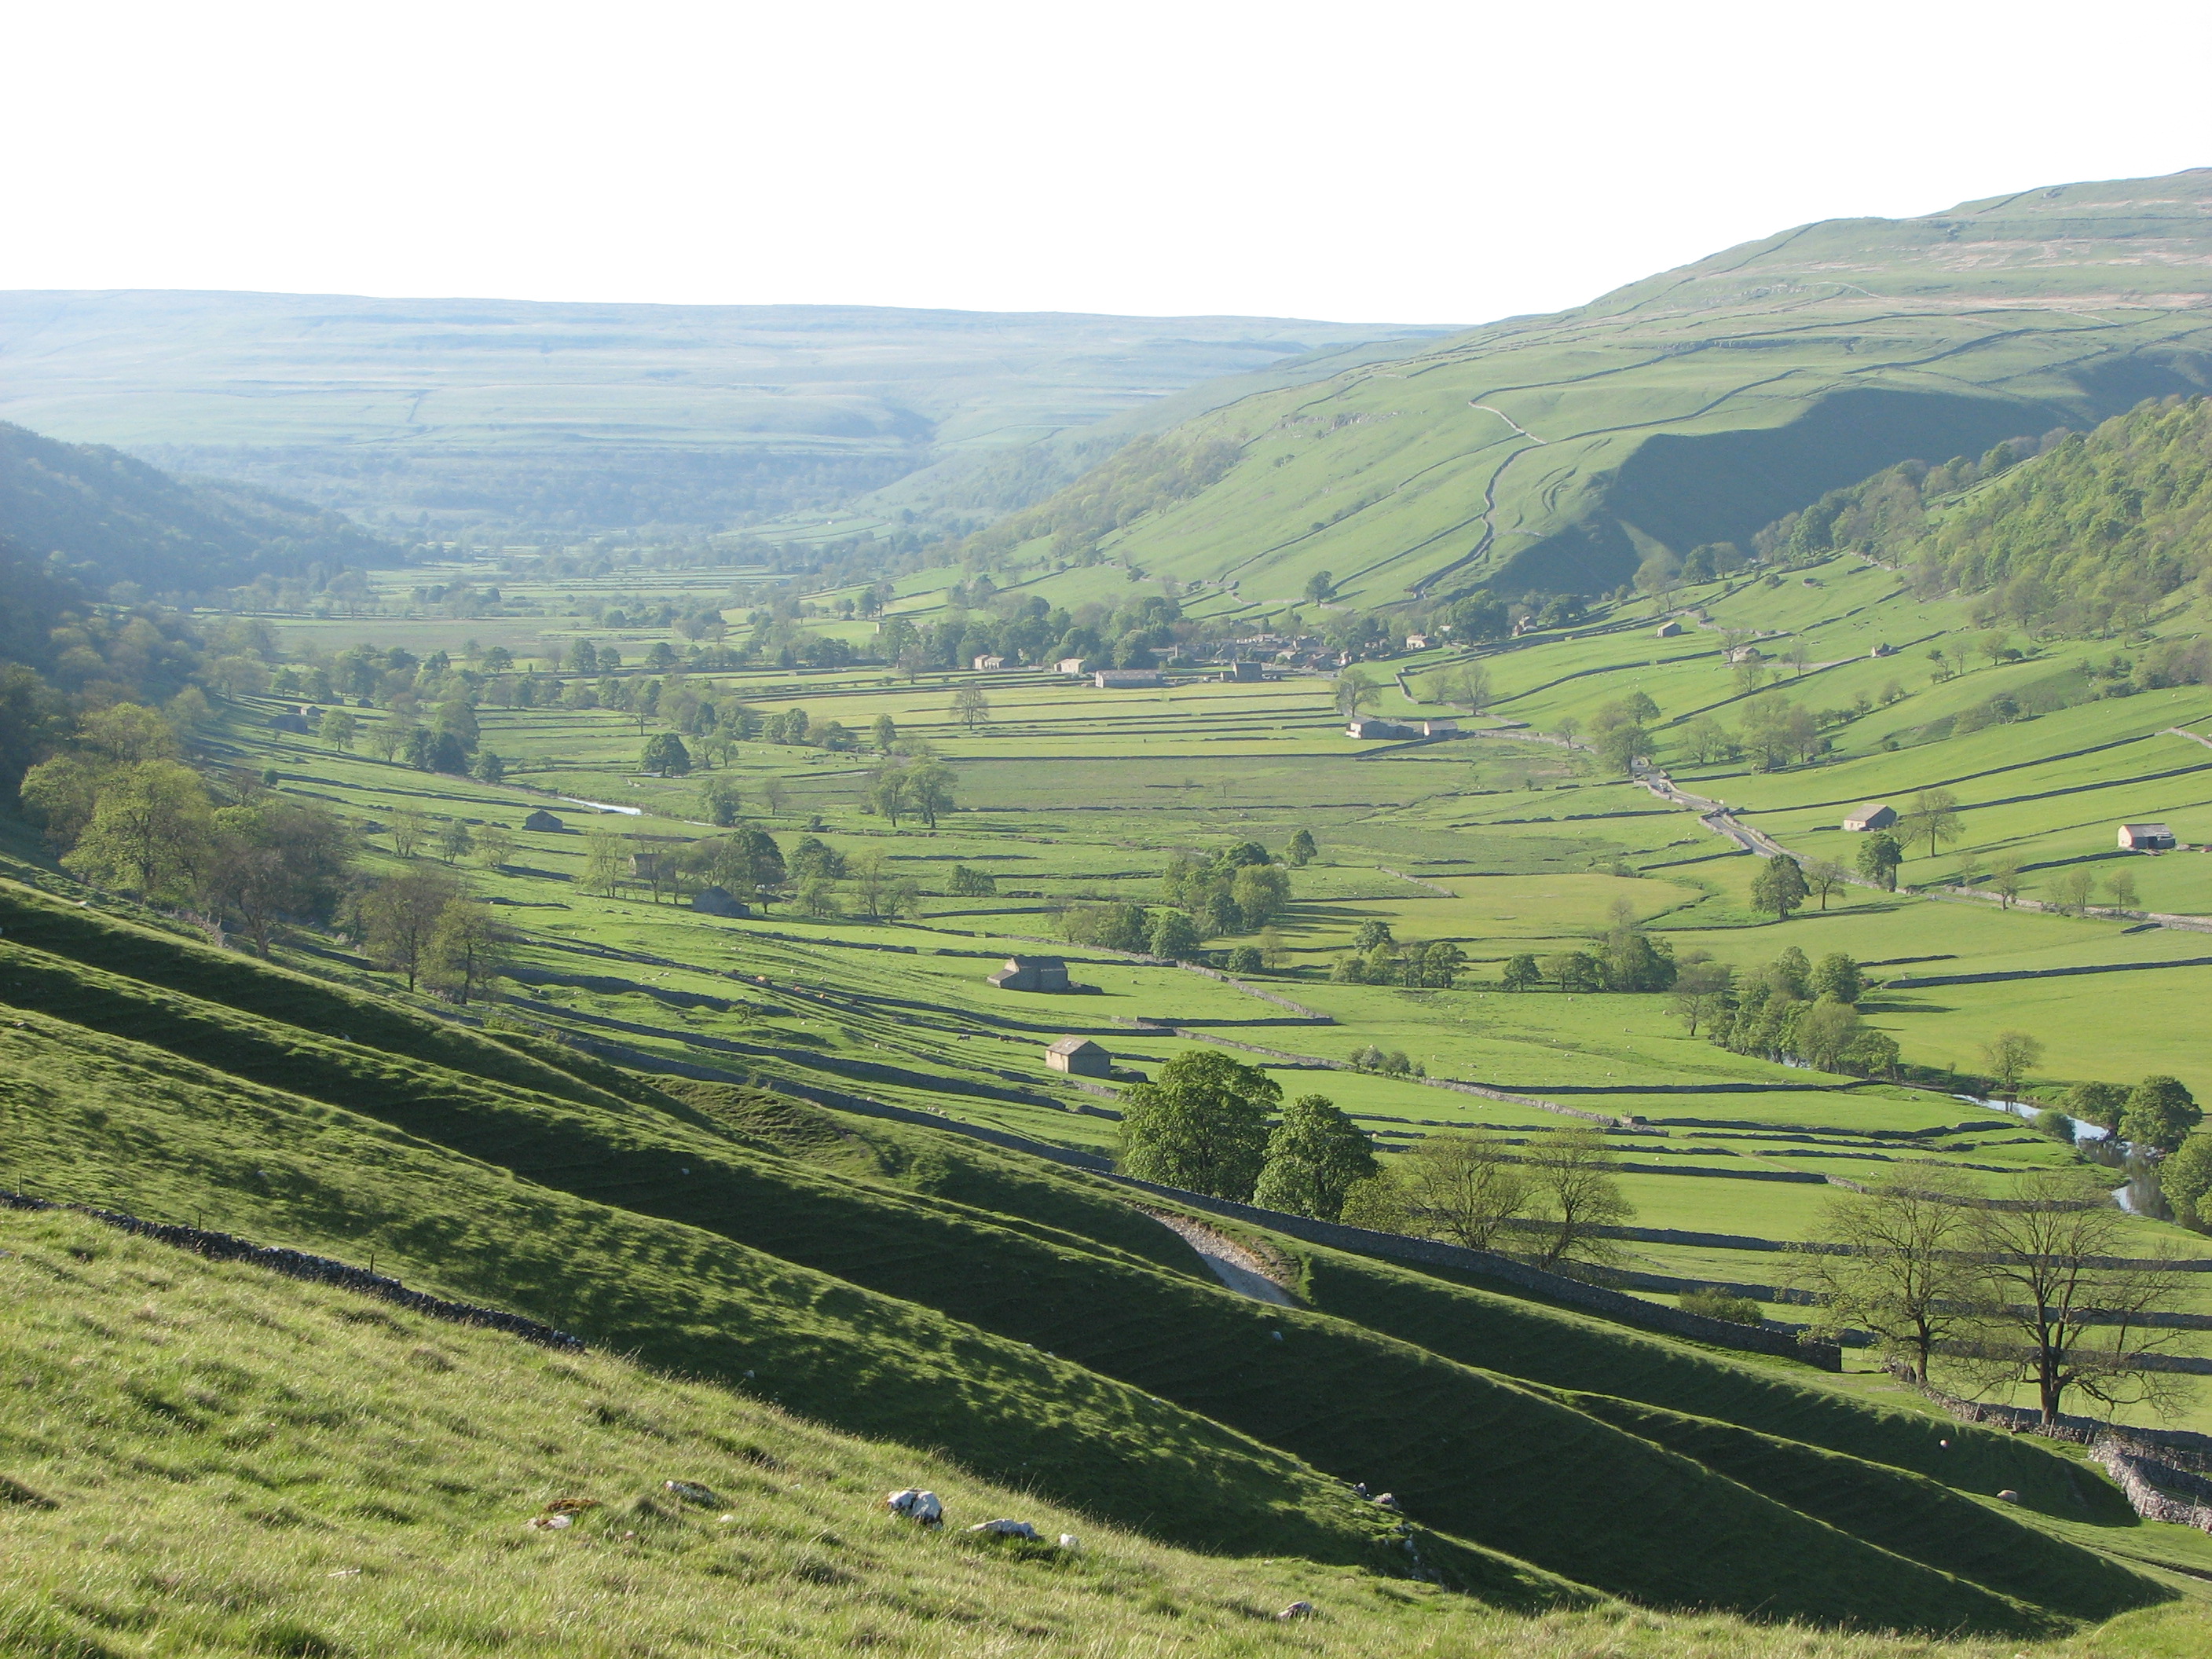 The classic walls and barns landscape of the Yorkshire Dales